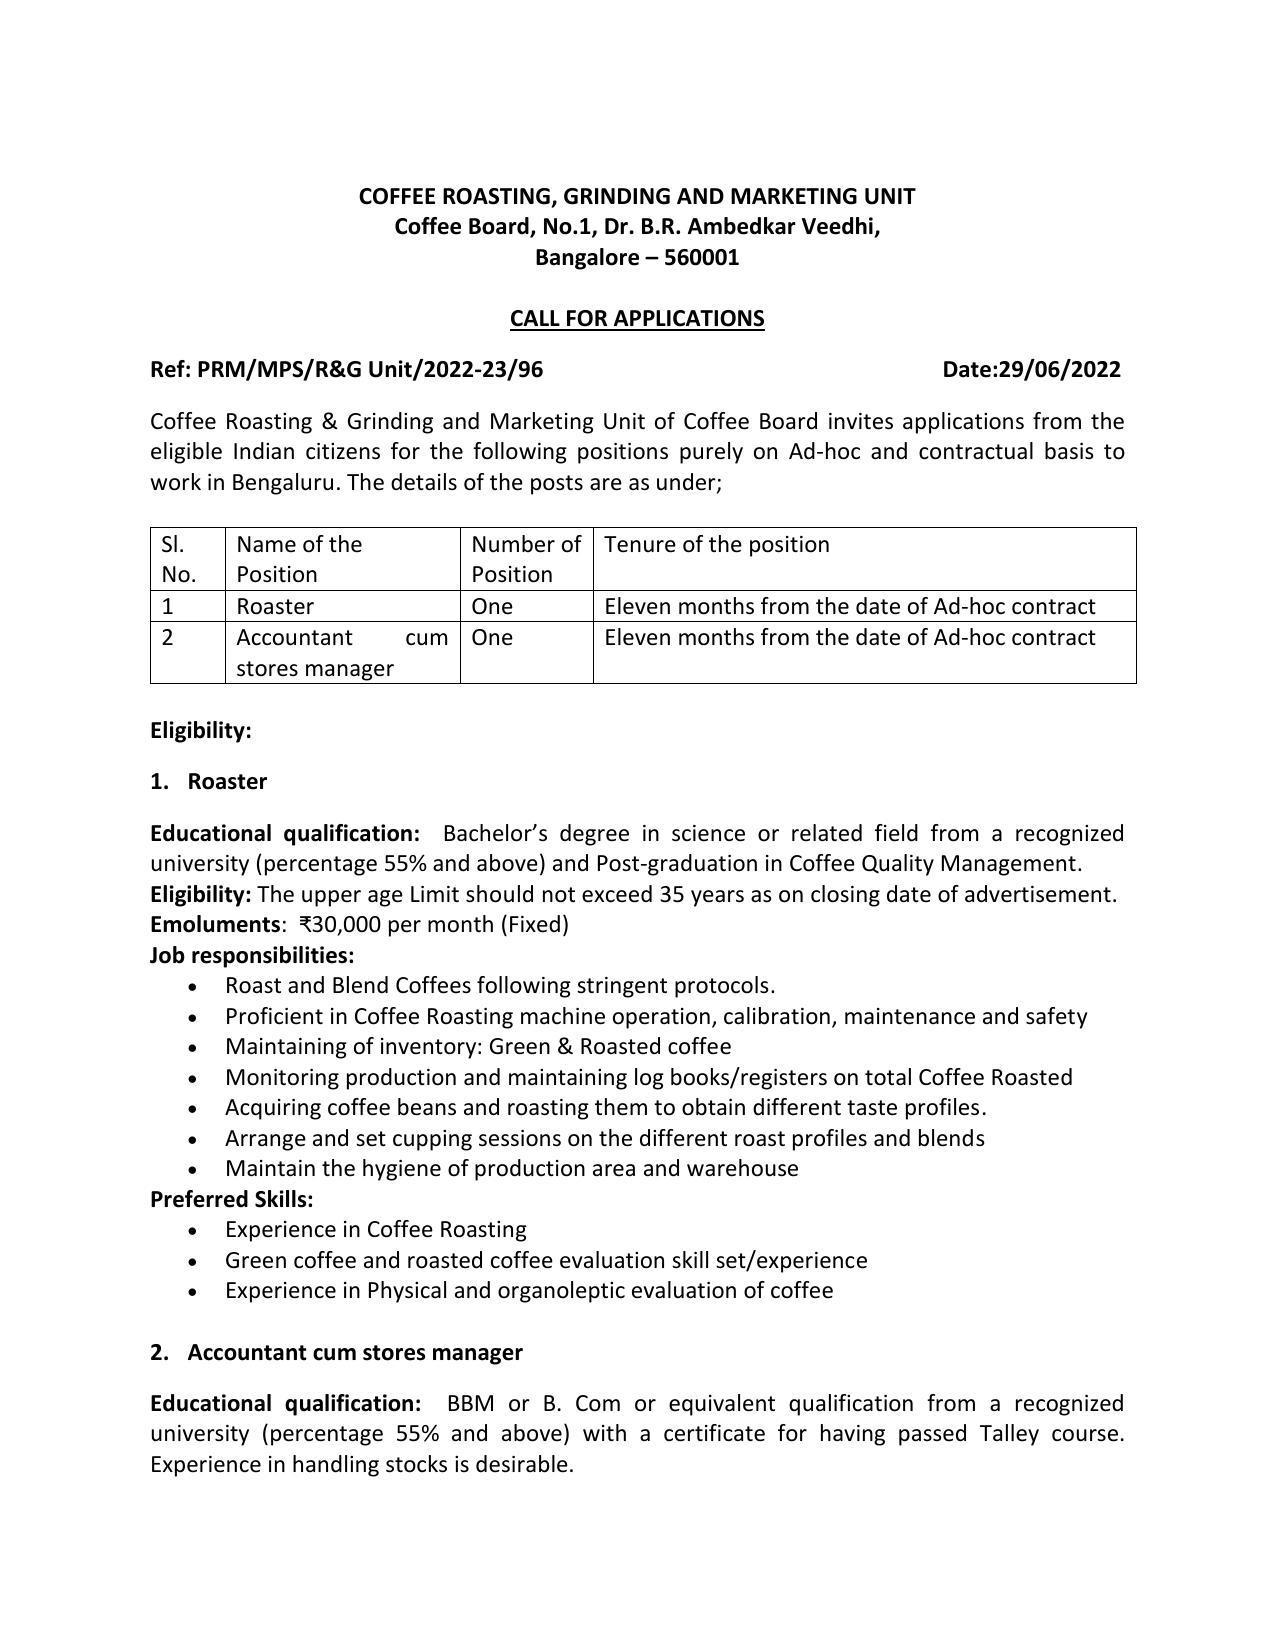 Coffee Board Invites Application for Accountant cum stores manager and Roaster Recruitment 2022 - Page 2